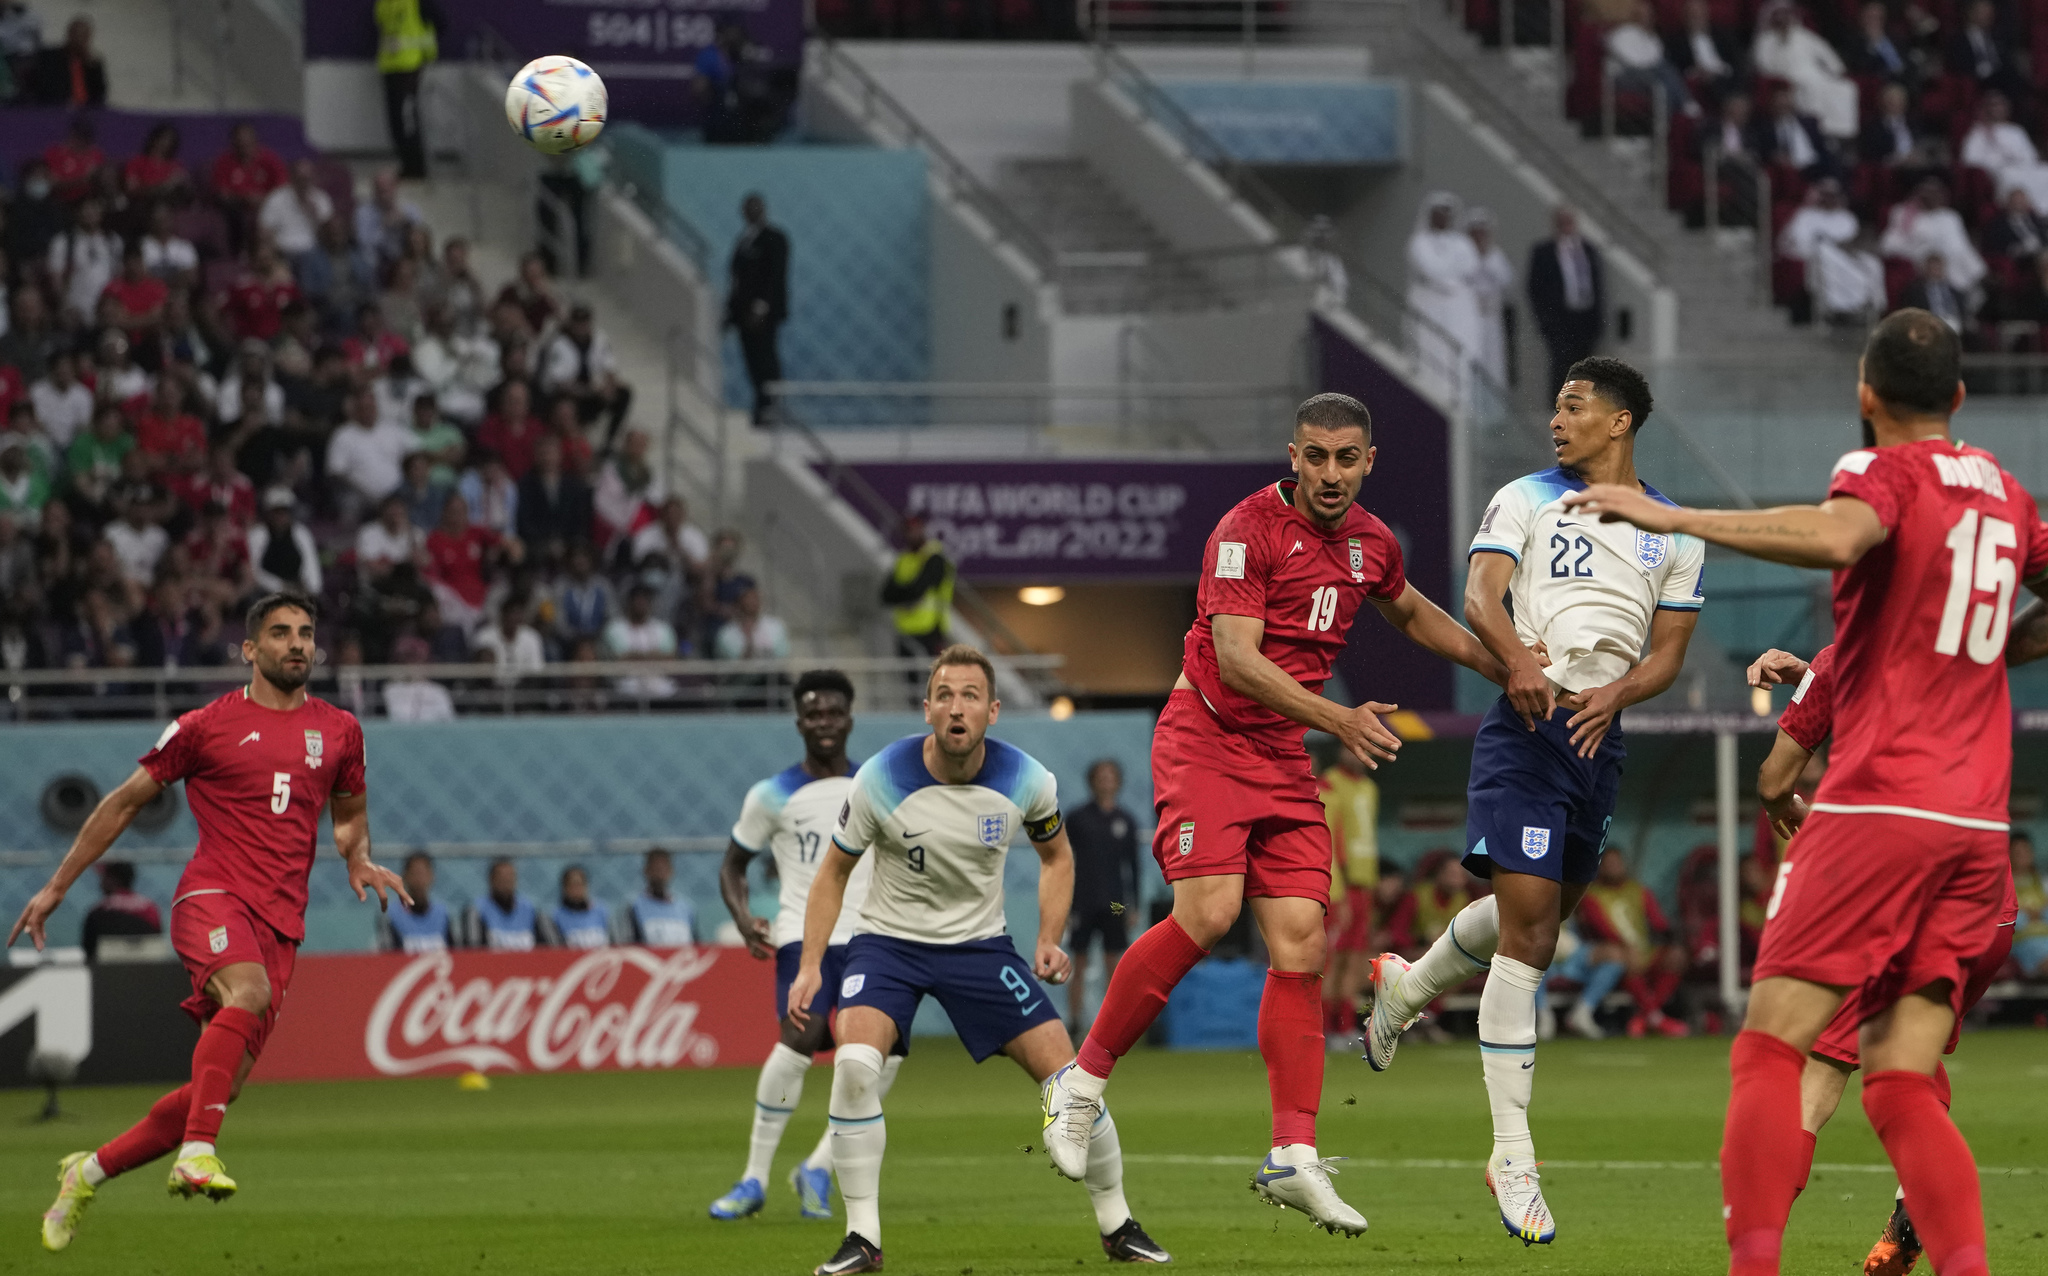  lt;HIT gt;England lt;/HIT gt;'s Jude Bellingham, second right, scores his side's opening goal during the World Cup group B soccer match between  lt;HIT gt;England lt;/HIT gt; and  lt;HIT gt;Iran lt;/HIT gt; at the Khalifa International Stadium in Doha, Qatar, Monday, Nov. 21, 2022. (AP Photo/Alessandra Tarantino)